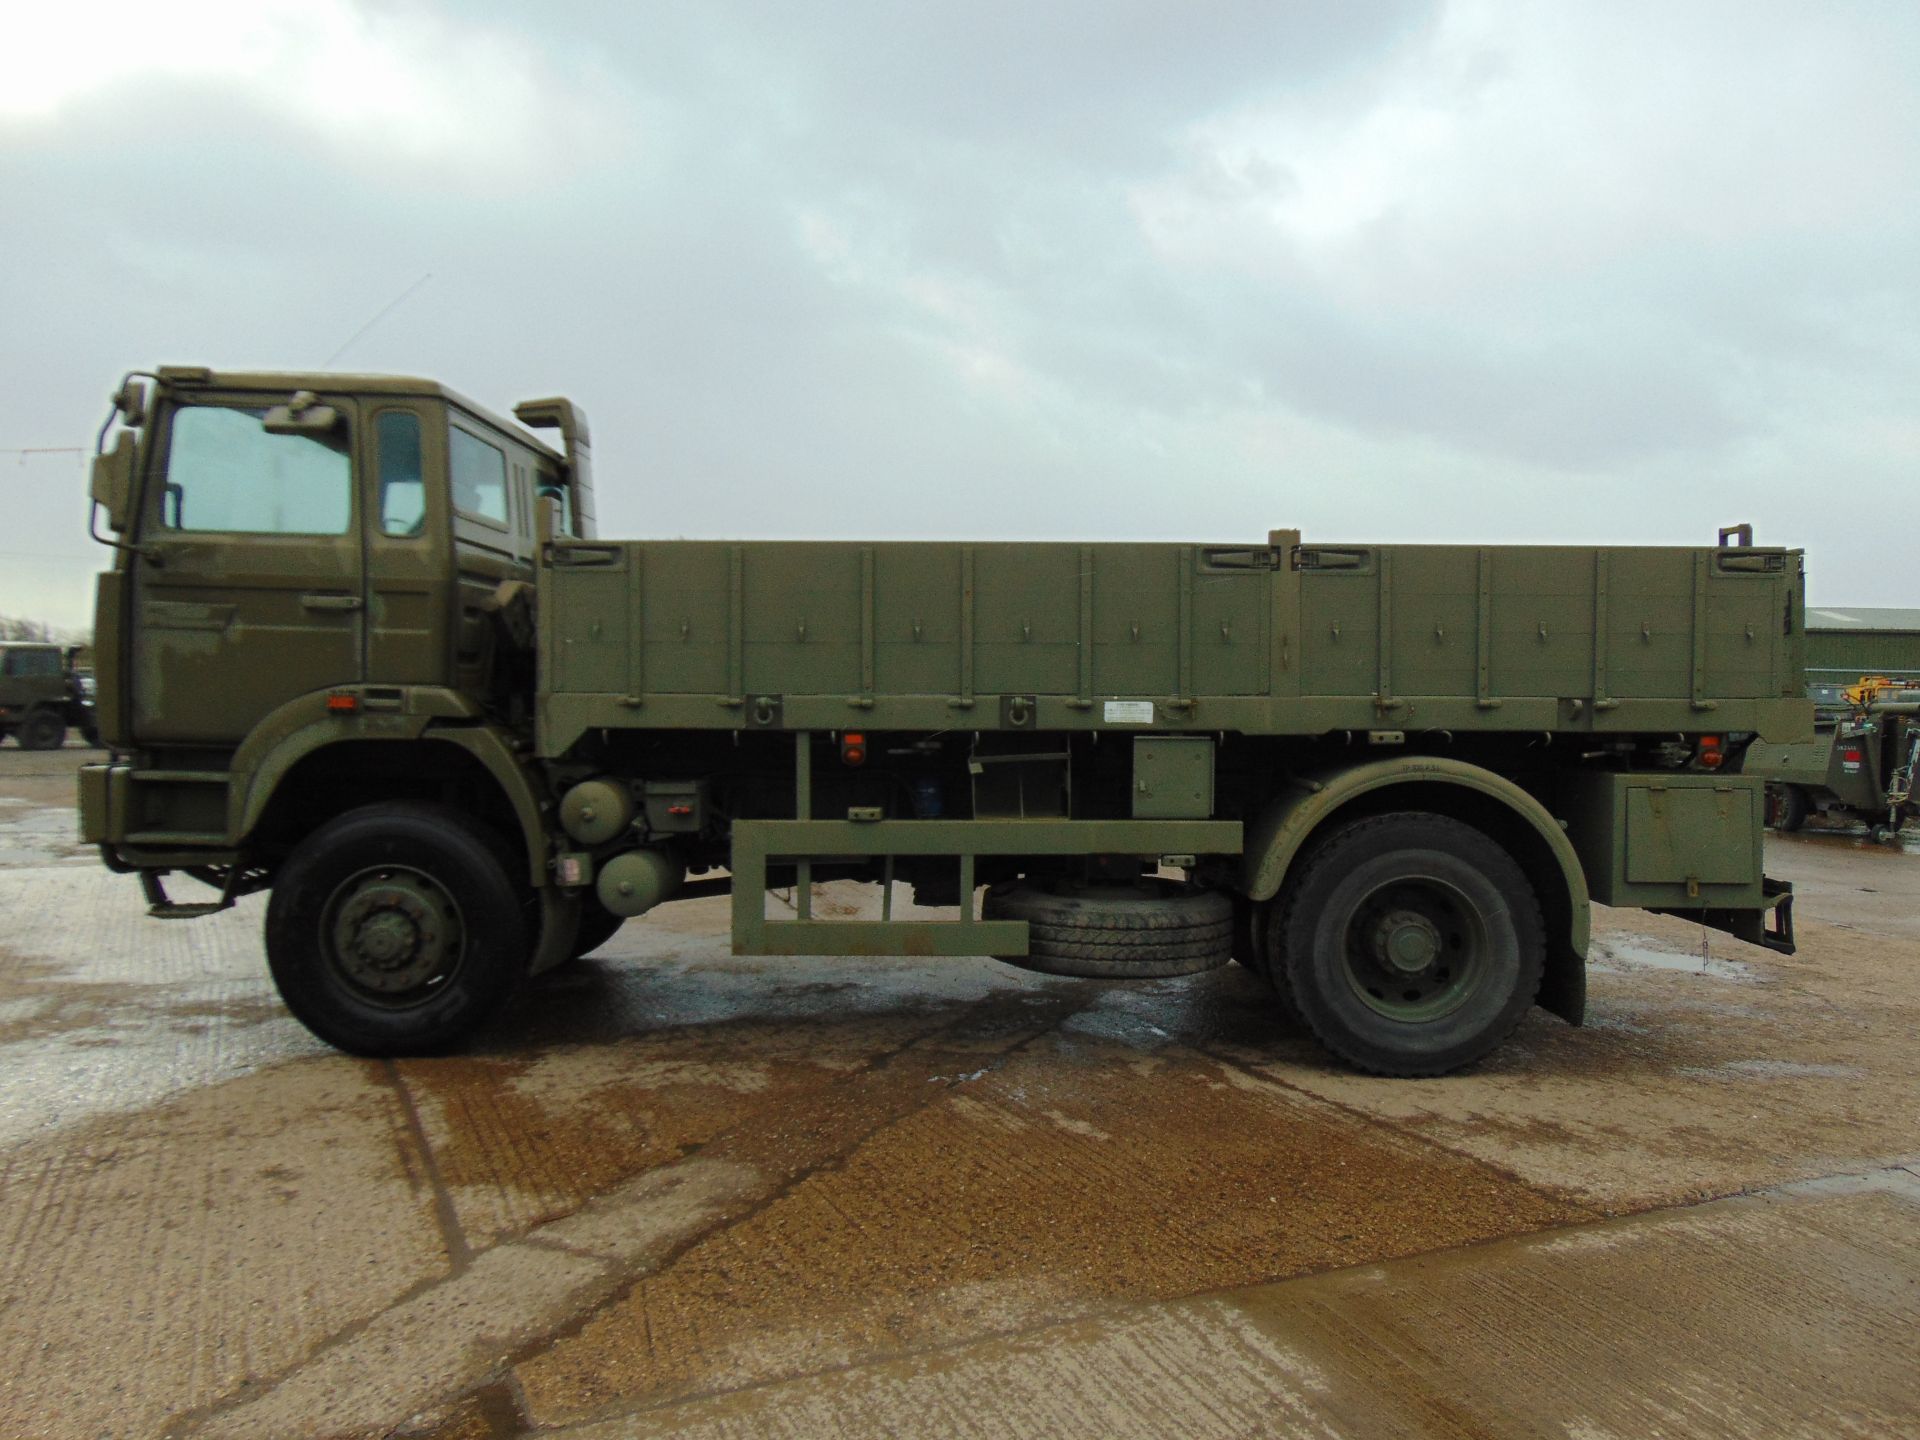 Renault G300 Maxter RHD 4x4 8T Cargo Truck with fitted winch - Image 4 of 15